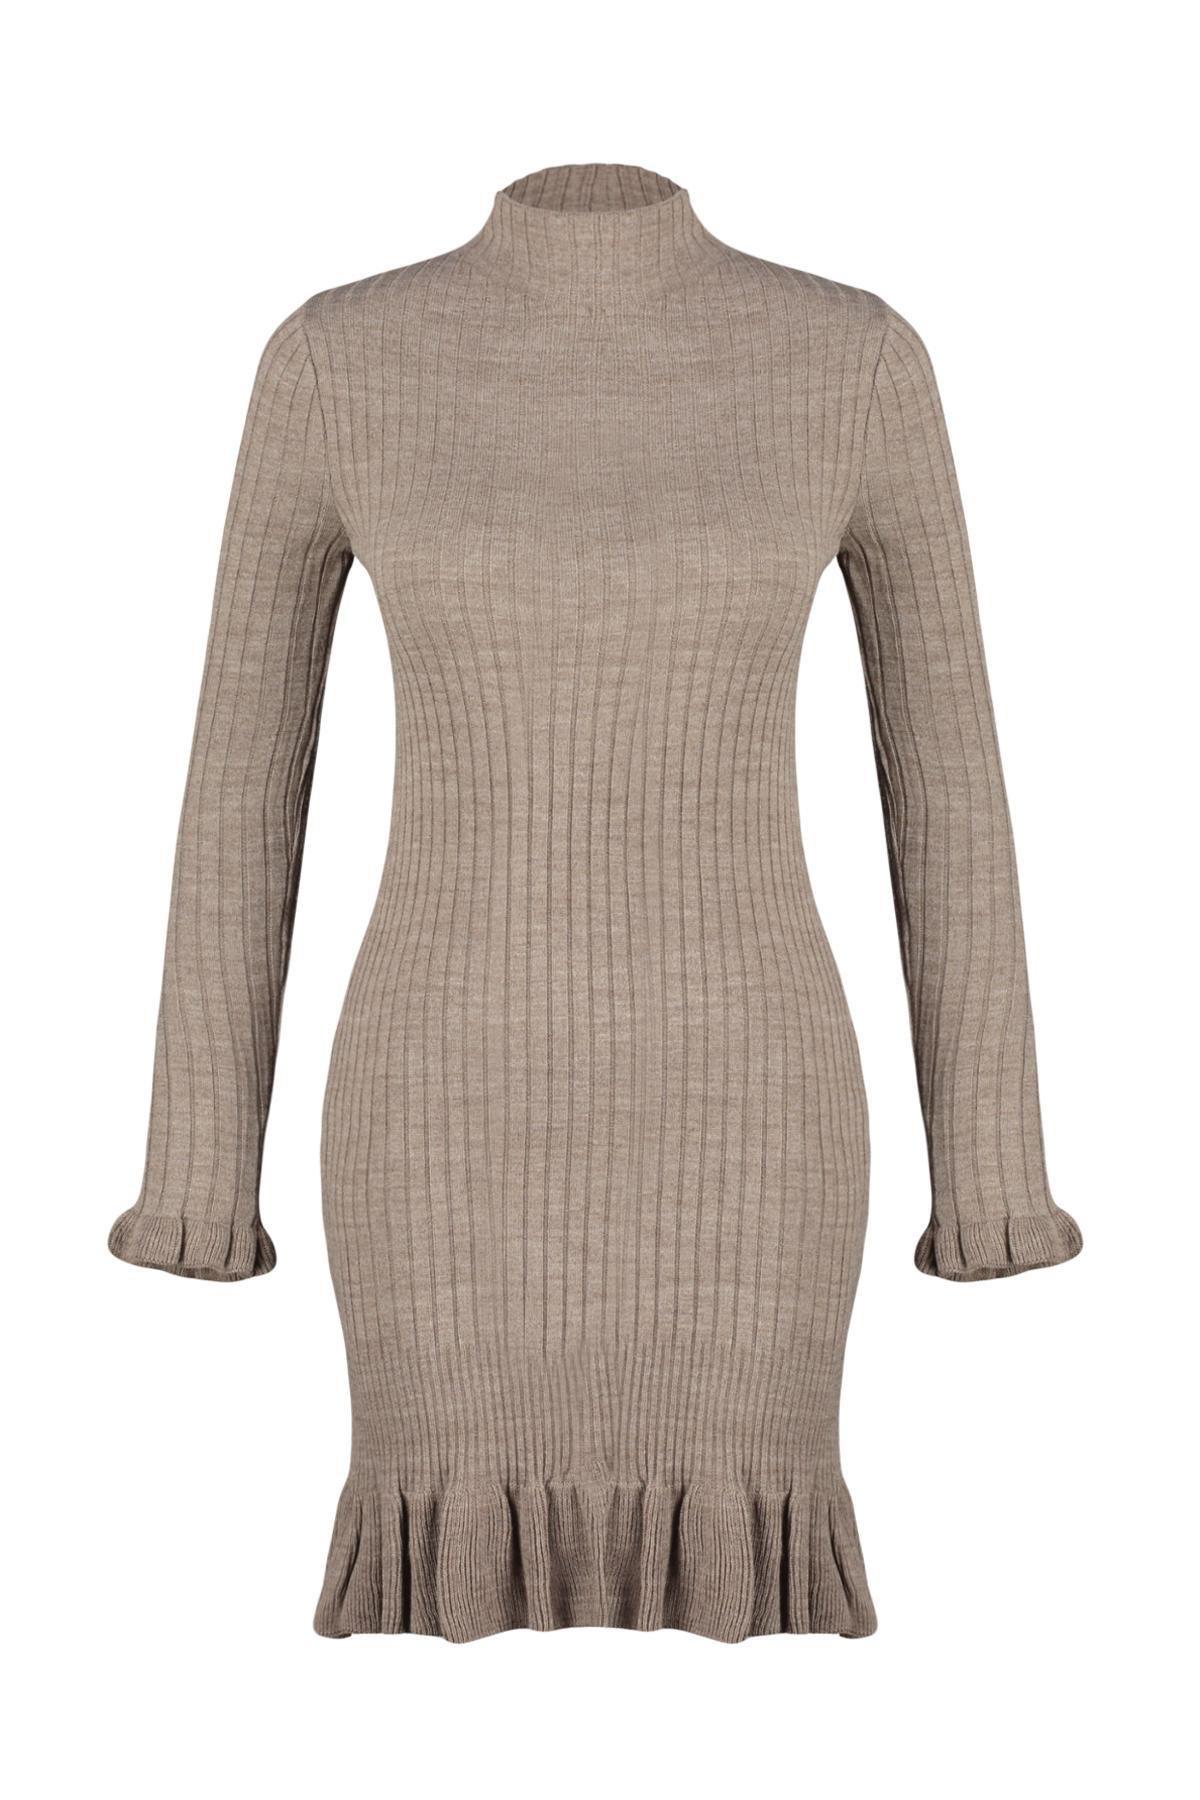 Trendyol - Brown Collared Knitted Mini Dress